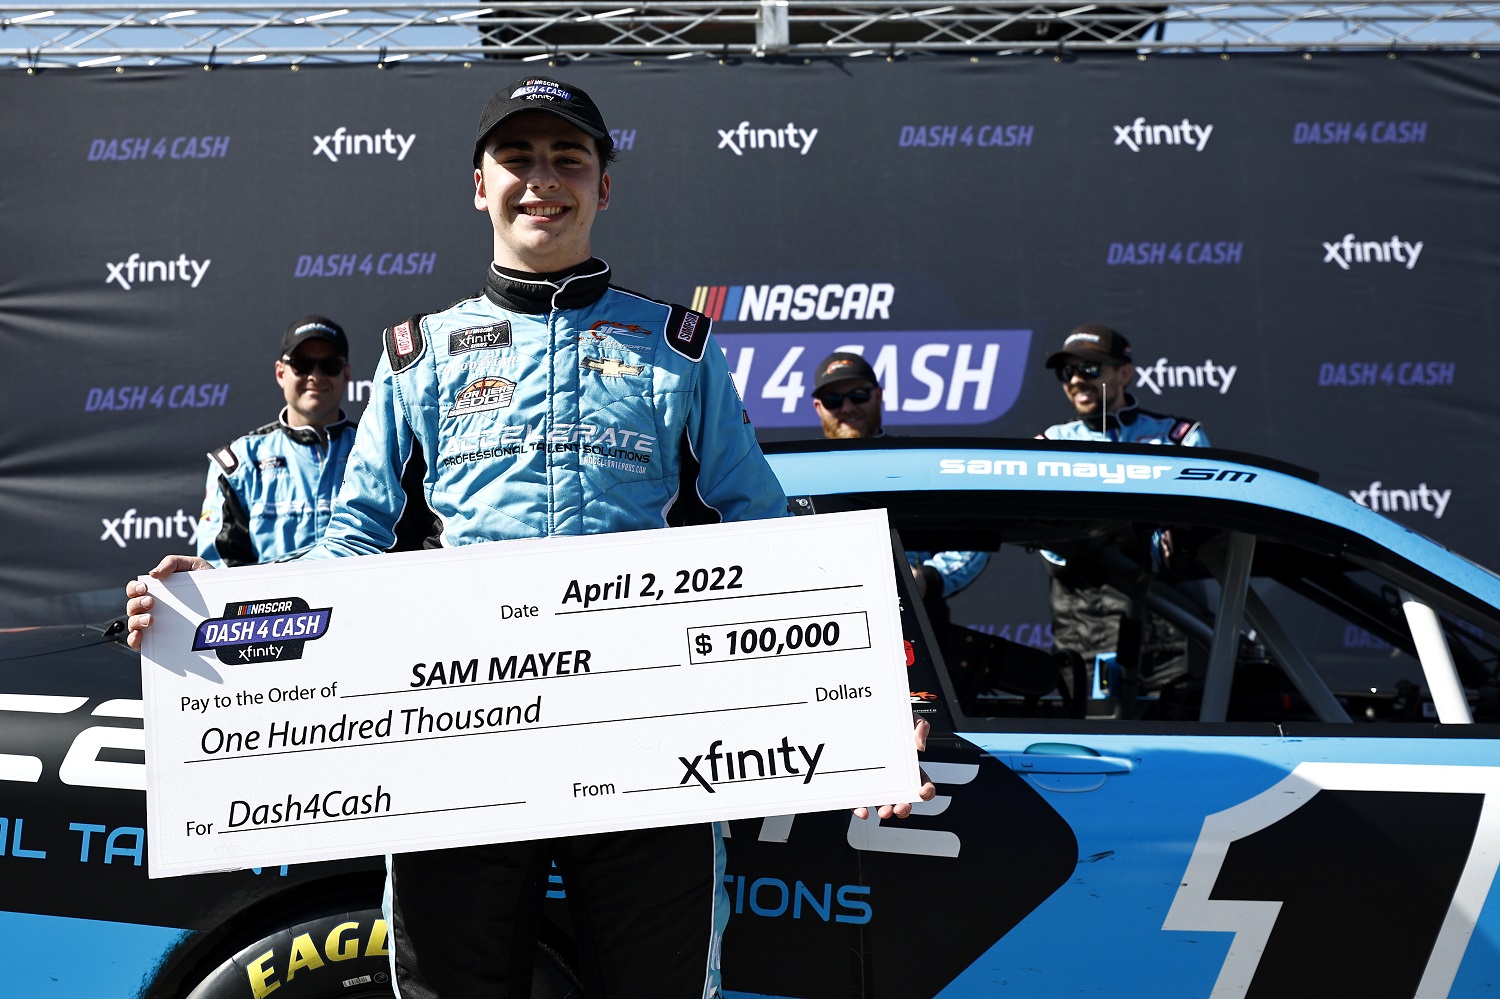 Sam Mayer poses with the Dash 4 Cash check after the NASCAR Xfinity Series ToyotaCare 250 at Richmond Raceway on April 2, 2022. | Jared C. Tilton/Getty Images